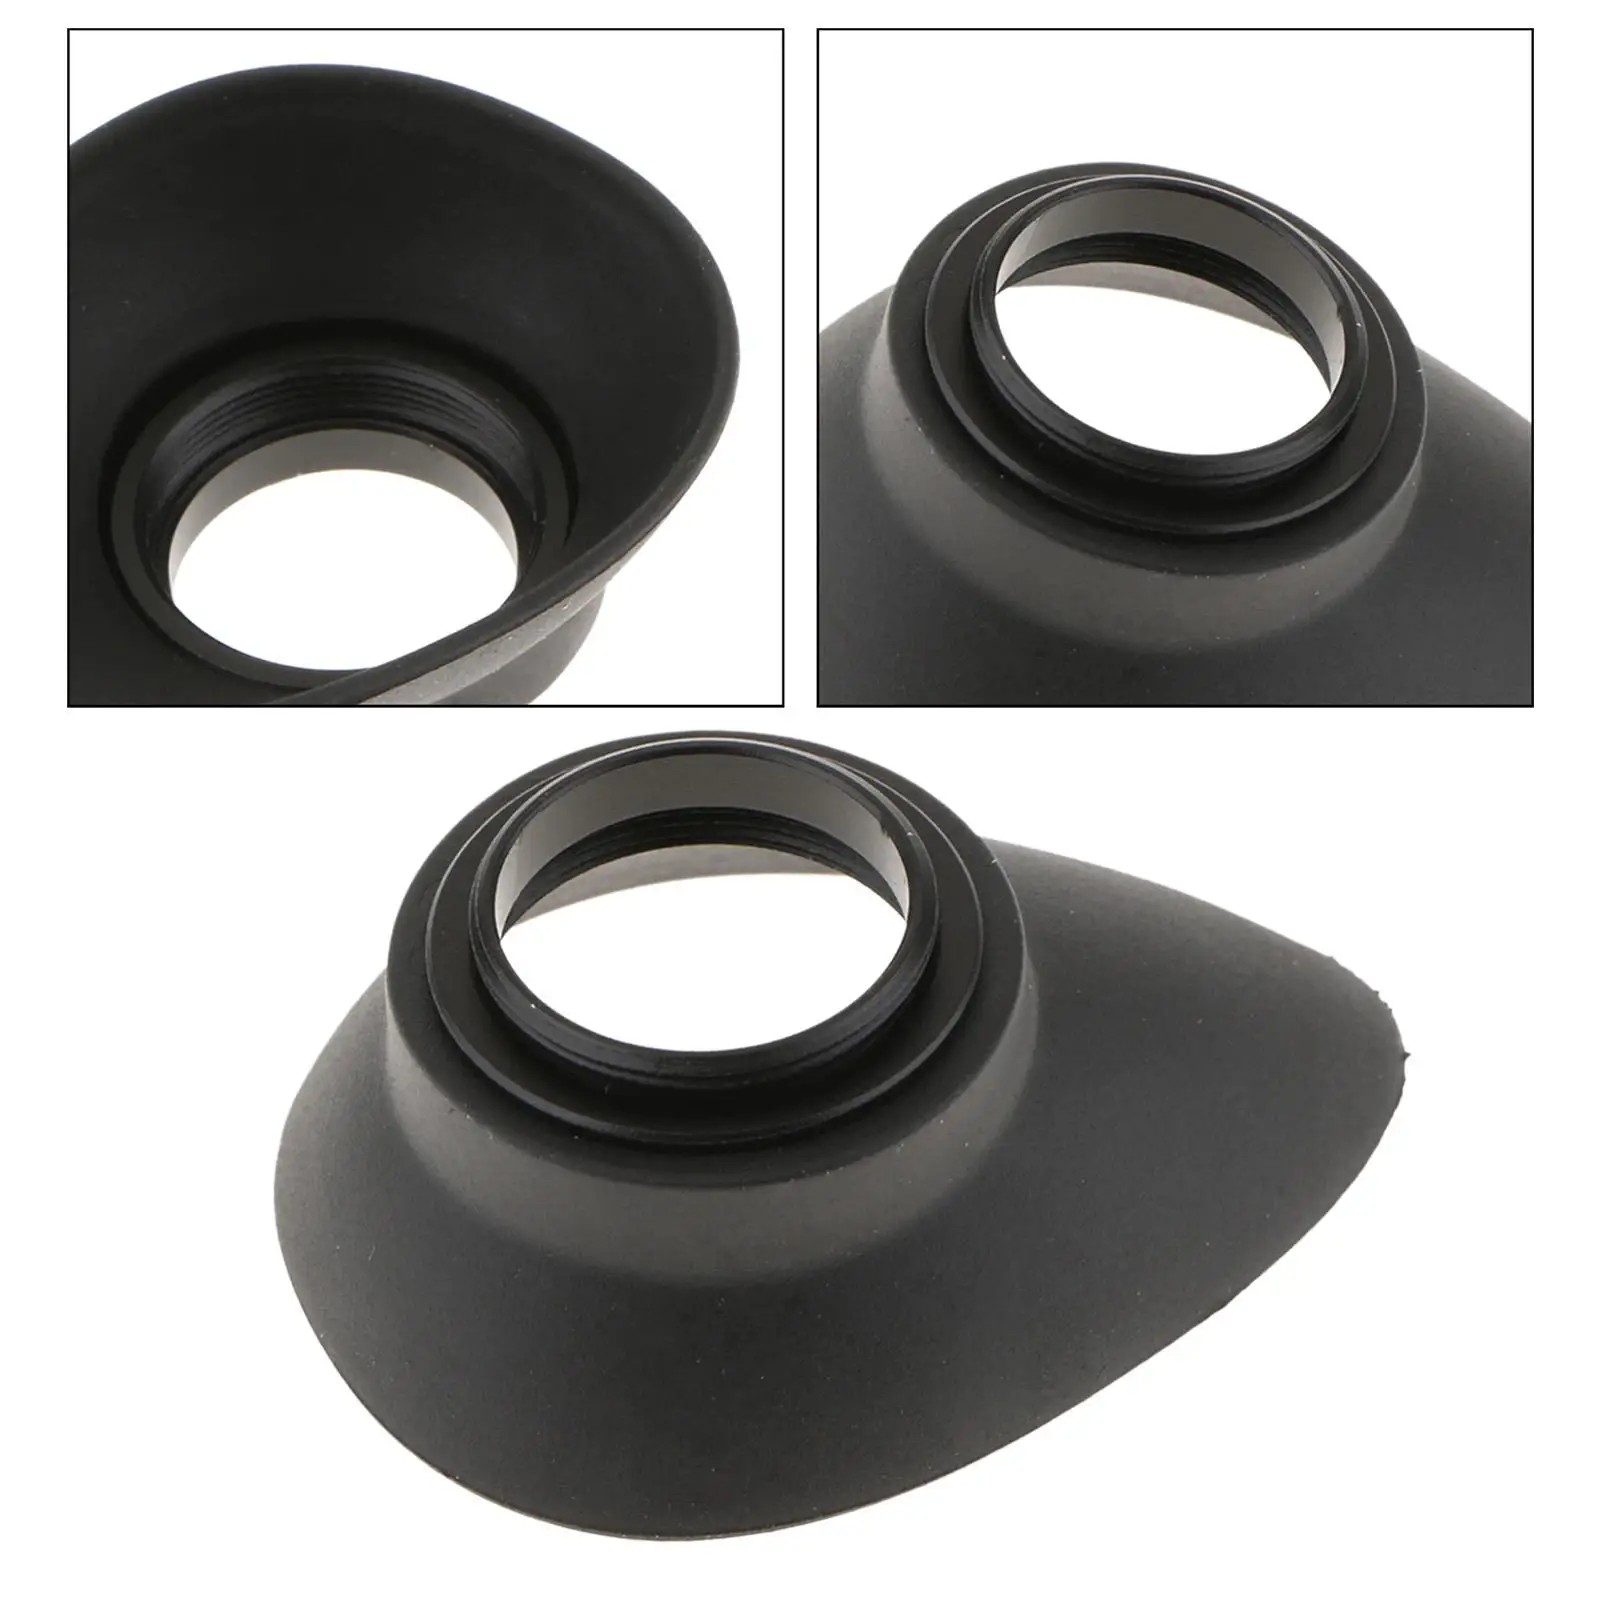 22mm Viewfinder Eyecup Eyepiece Eyeshade Guard Protection for D4 D3x D3S D2x D2H Accessories Lightweight Sturdy Professional